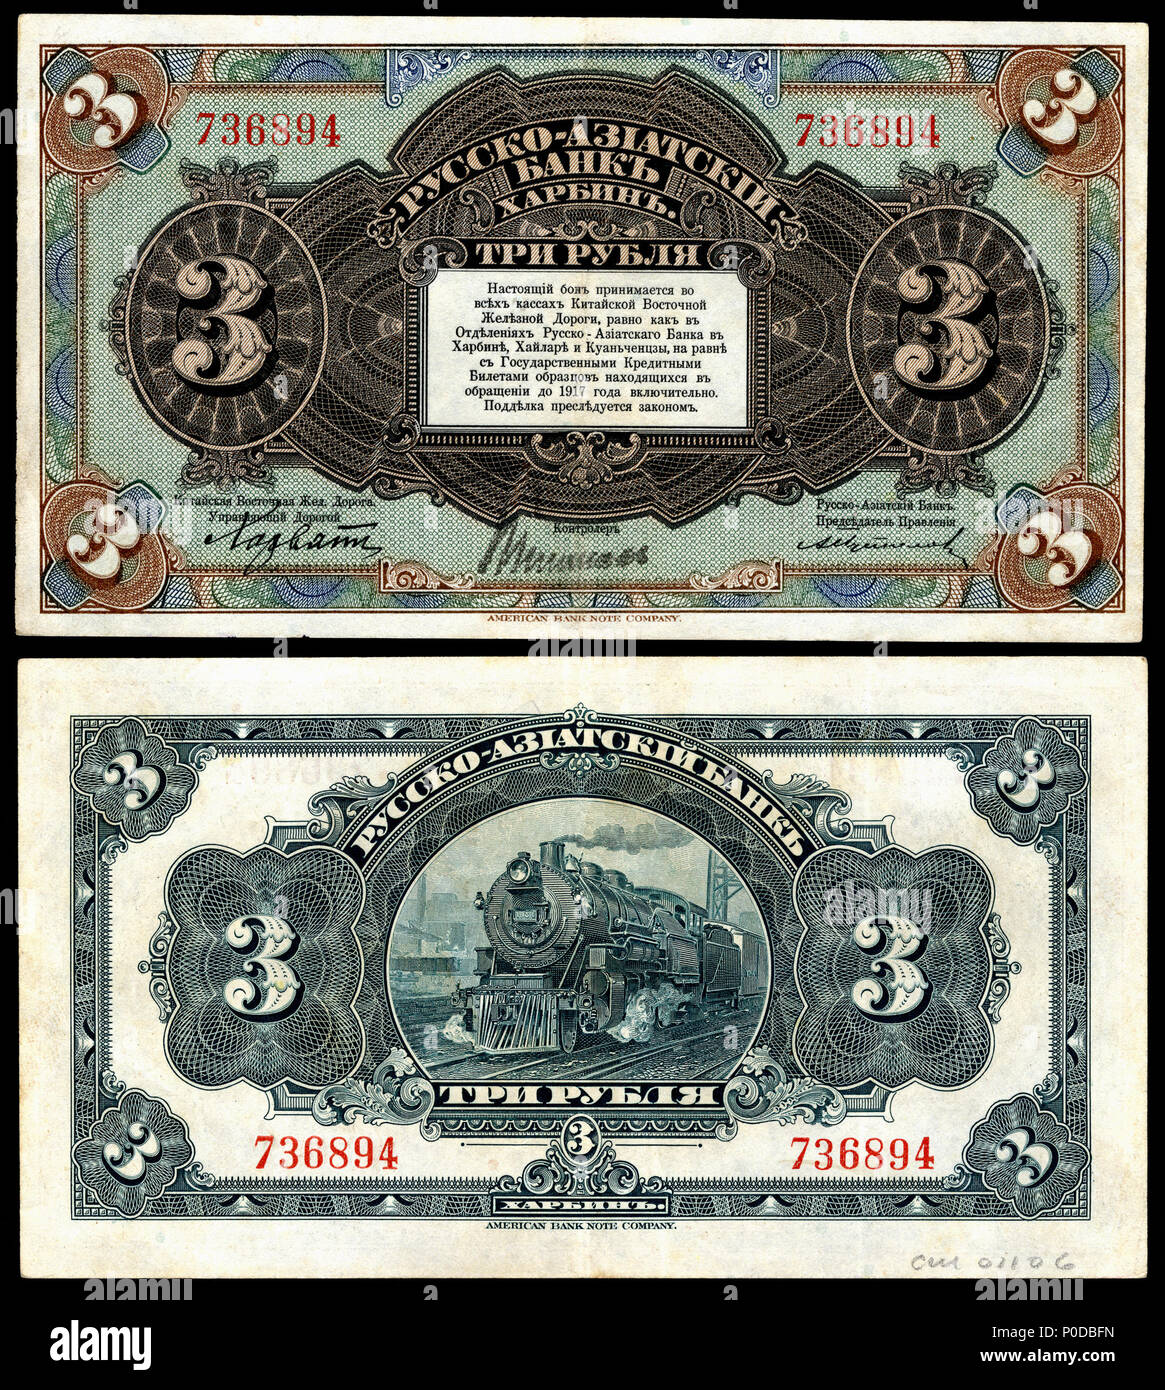 English: China/Russia, Russo-Asiatic Bank, 3 rubles (1917